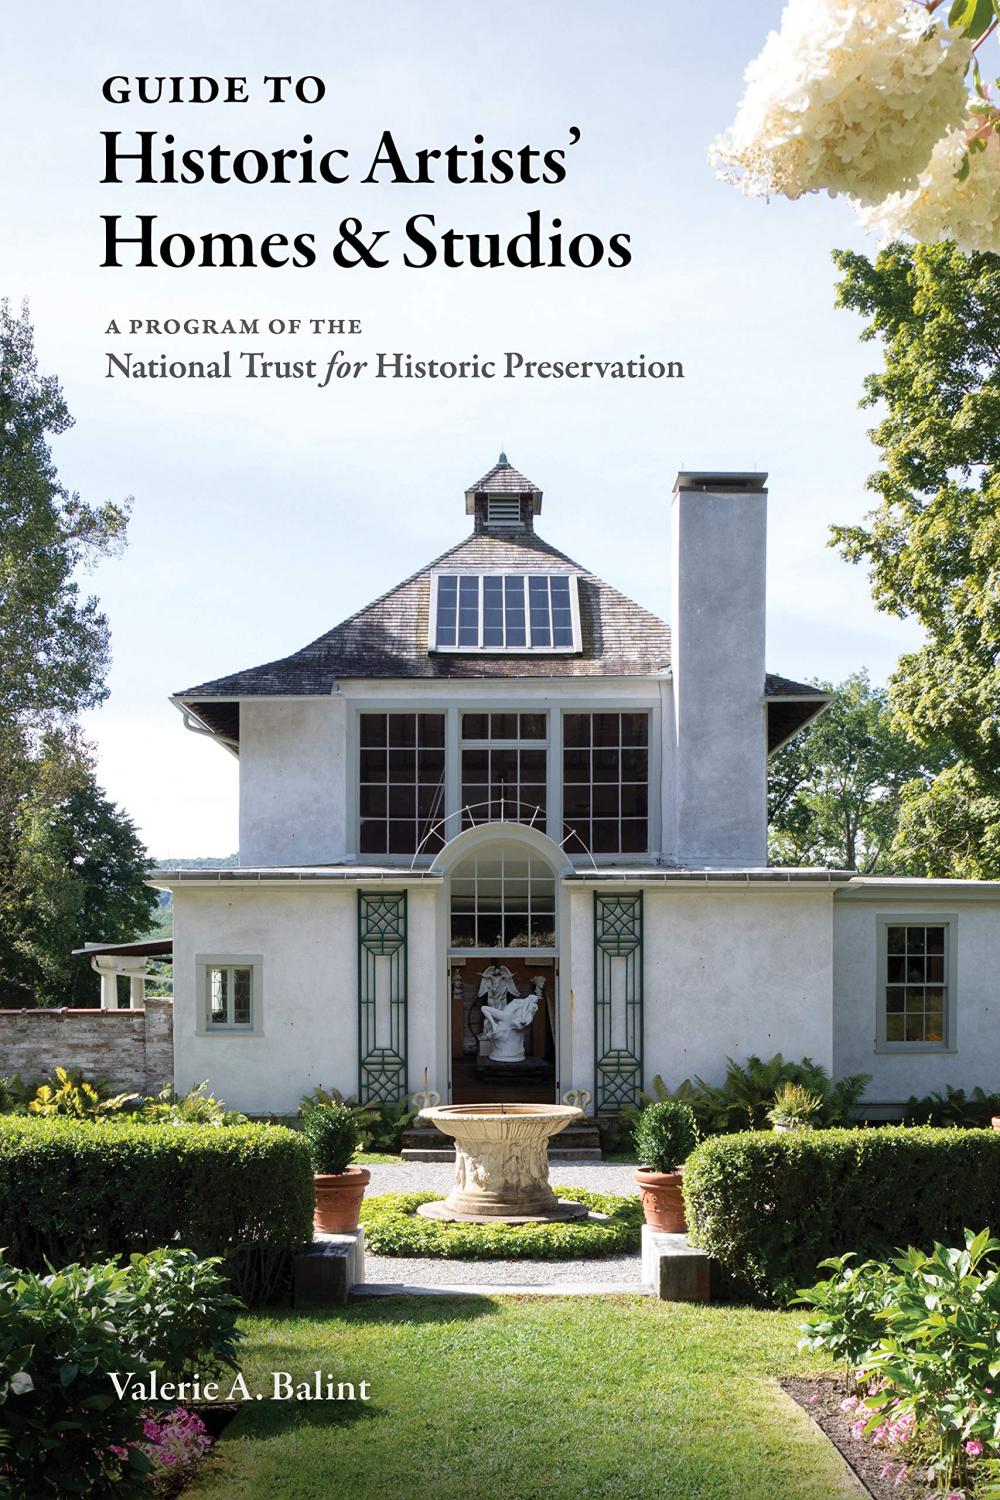 Cover of guidebook featuring Chesterwood Studio